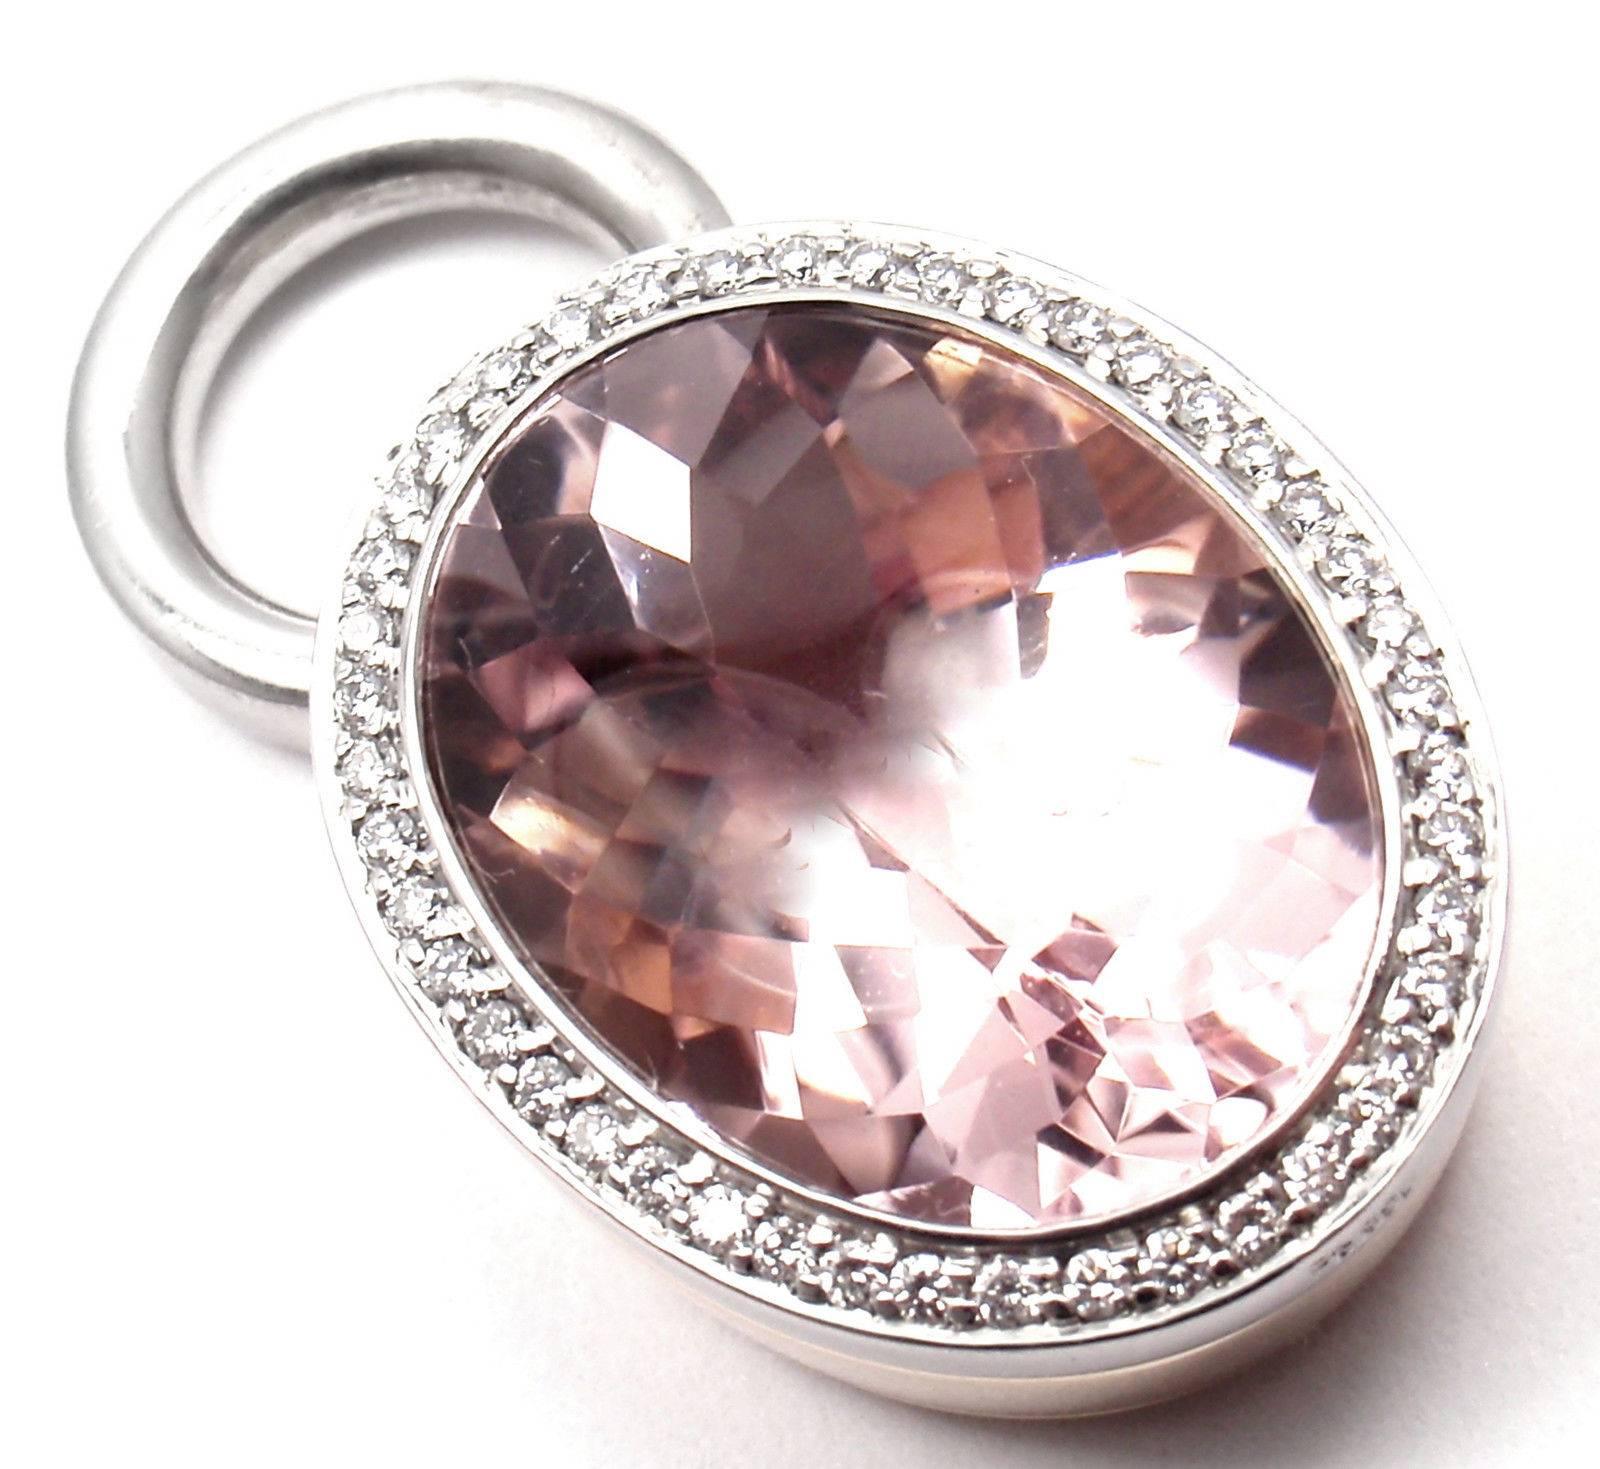 18k Rose Gold And Platinum Large Kunzite Diamond  Pendant by Jochen Pohl.
With 50 round brilliant cut diamonds VS2 clarity G color total weight approx. .50ct
1 large oval Kunzite 21mm x 16mm

Details:
Measurements: 35mm x 20mm
Weight:  30.3